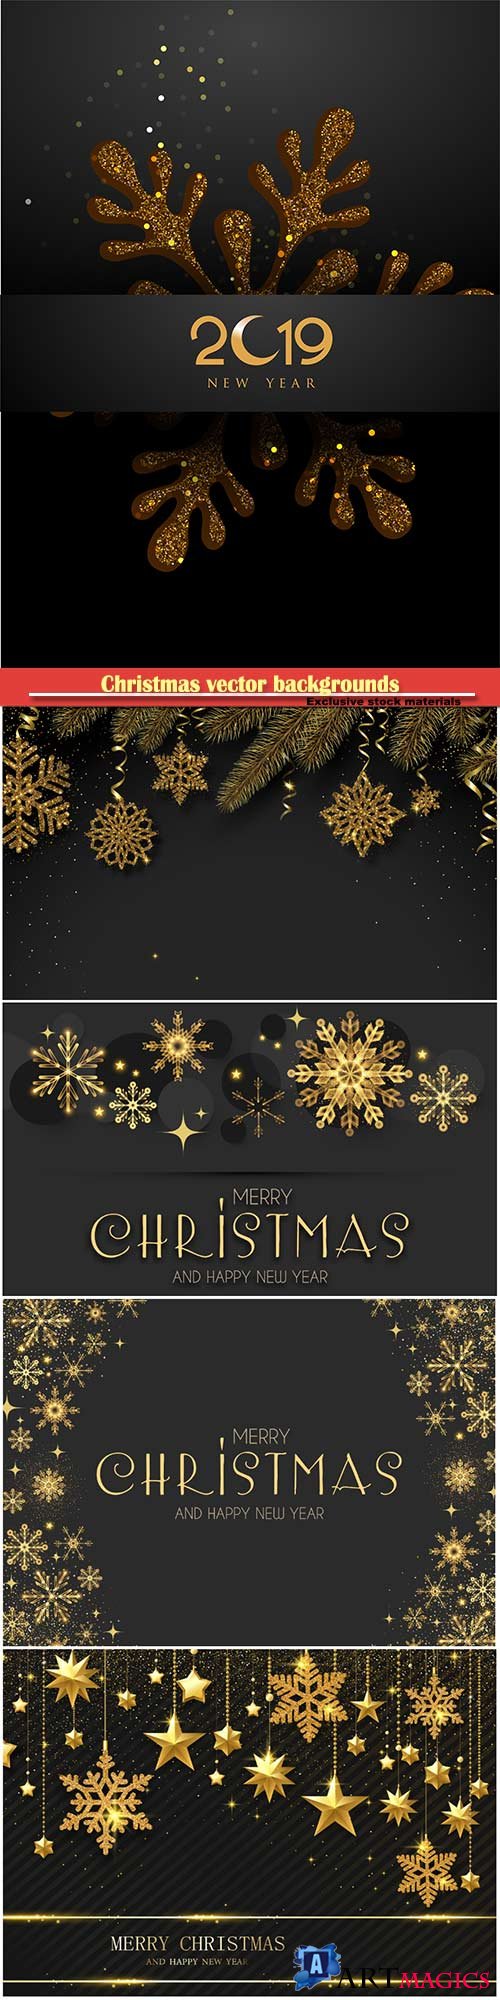 Christmas vector backgrounds with golden decor